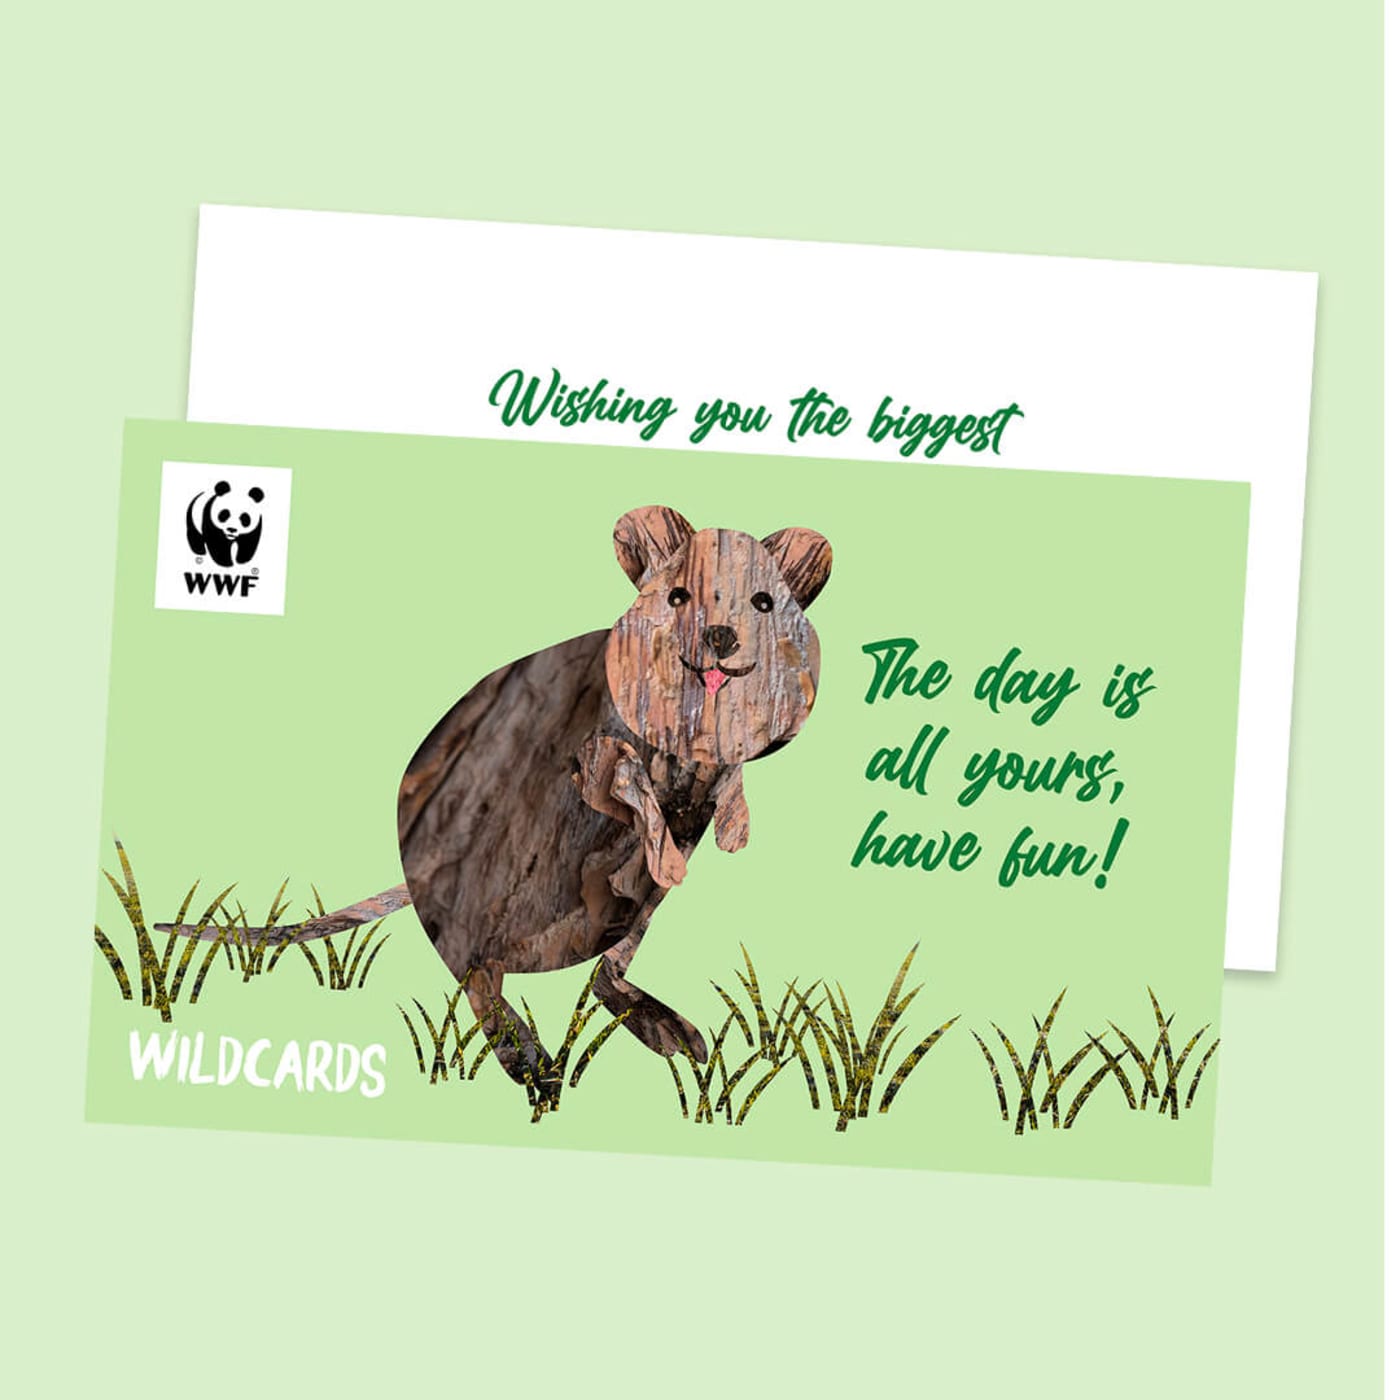 Illustration of a quokka with text that says 'the day is all yours, have fun!'